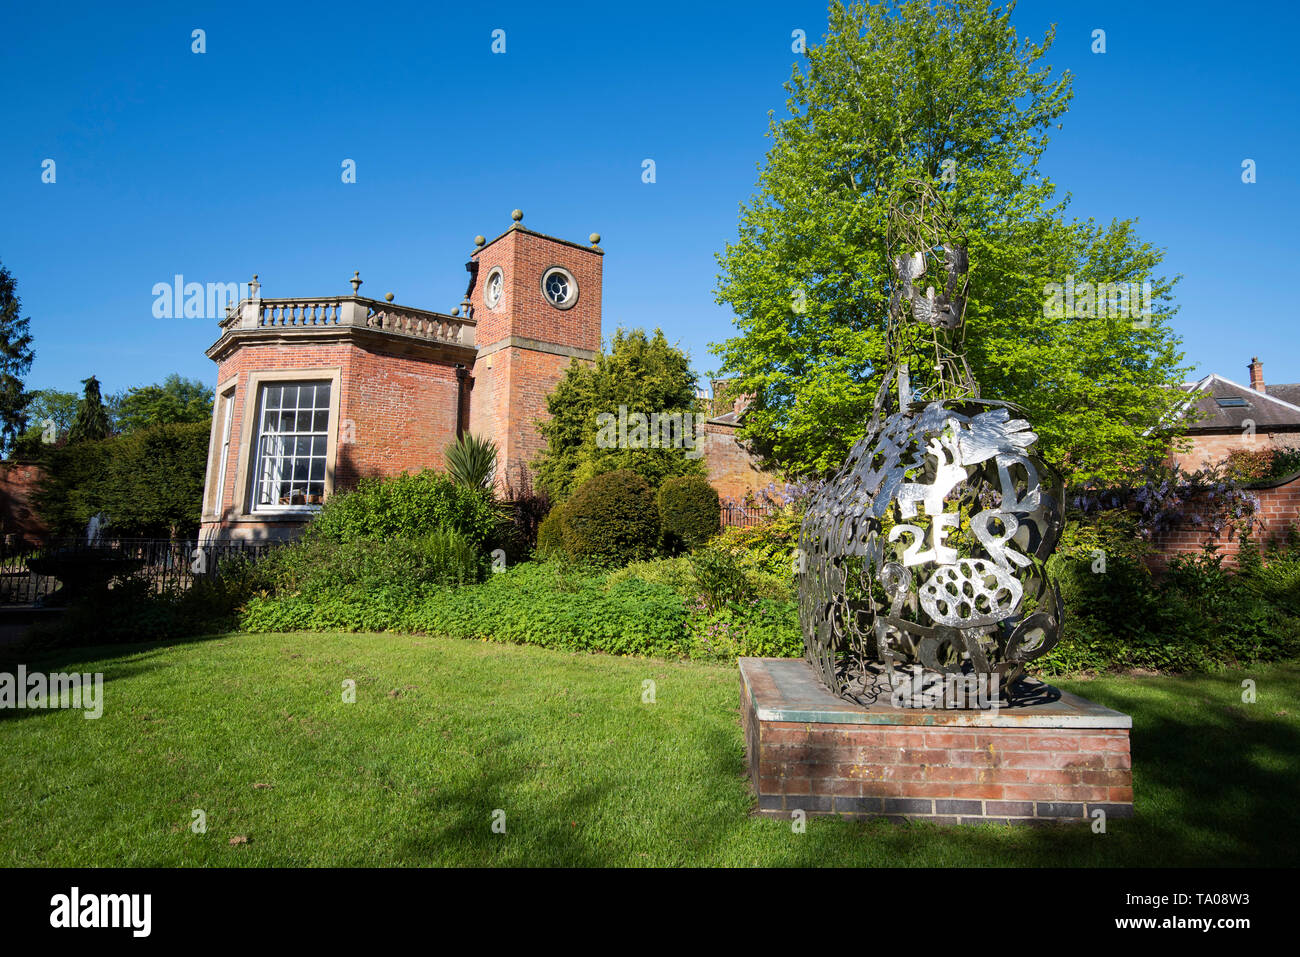 Orangery and Gardens at Rufford Abbey in Nottinghamshire, England UK Stock Photo